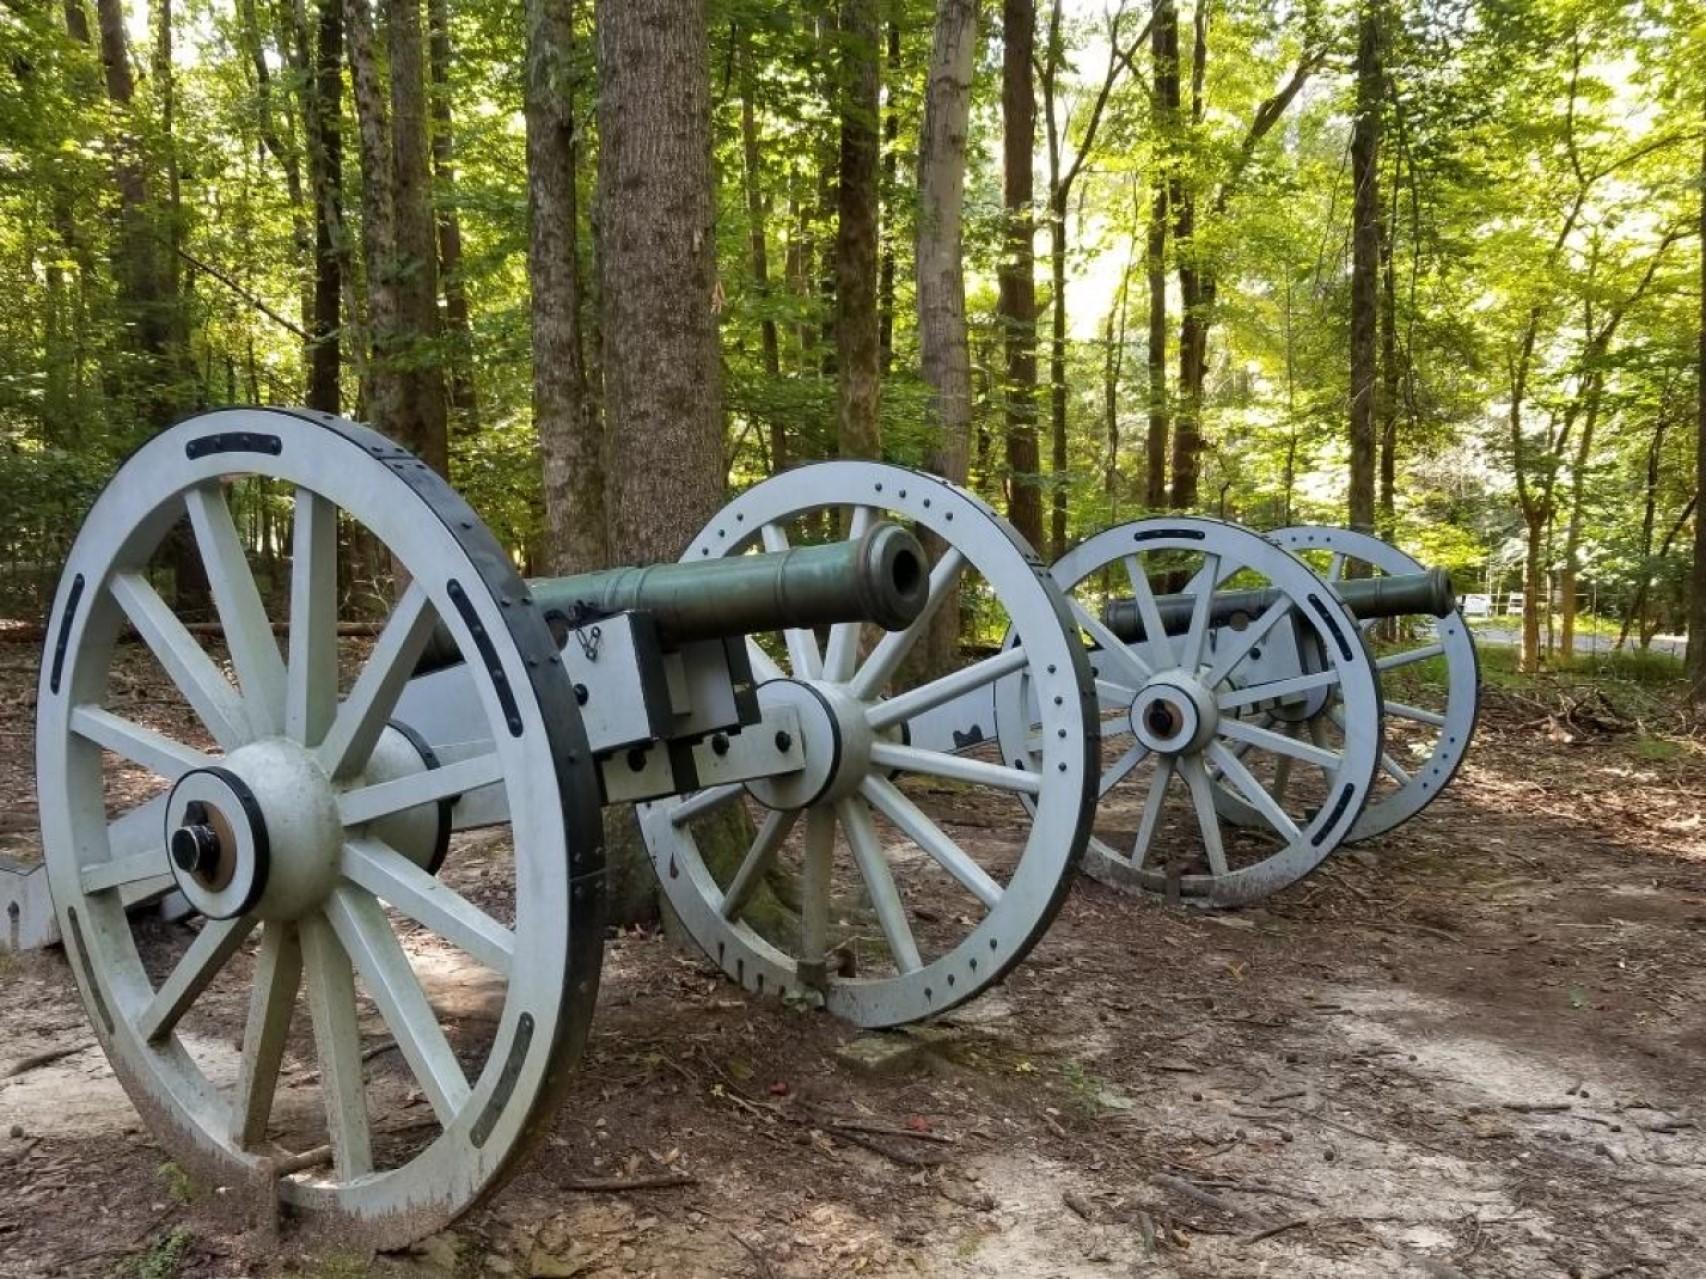 Two cannons on grey carriages (wheels) sit in a forest